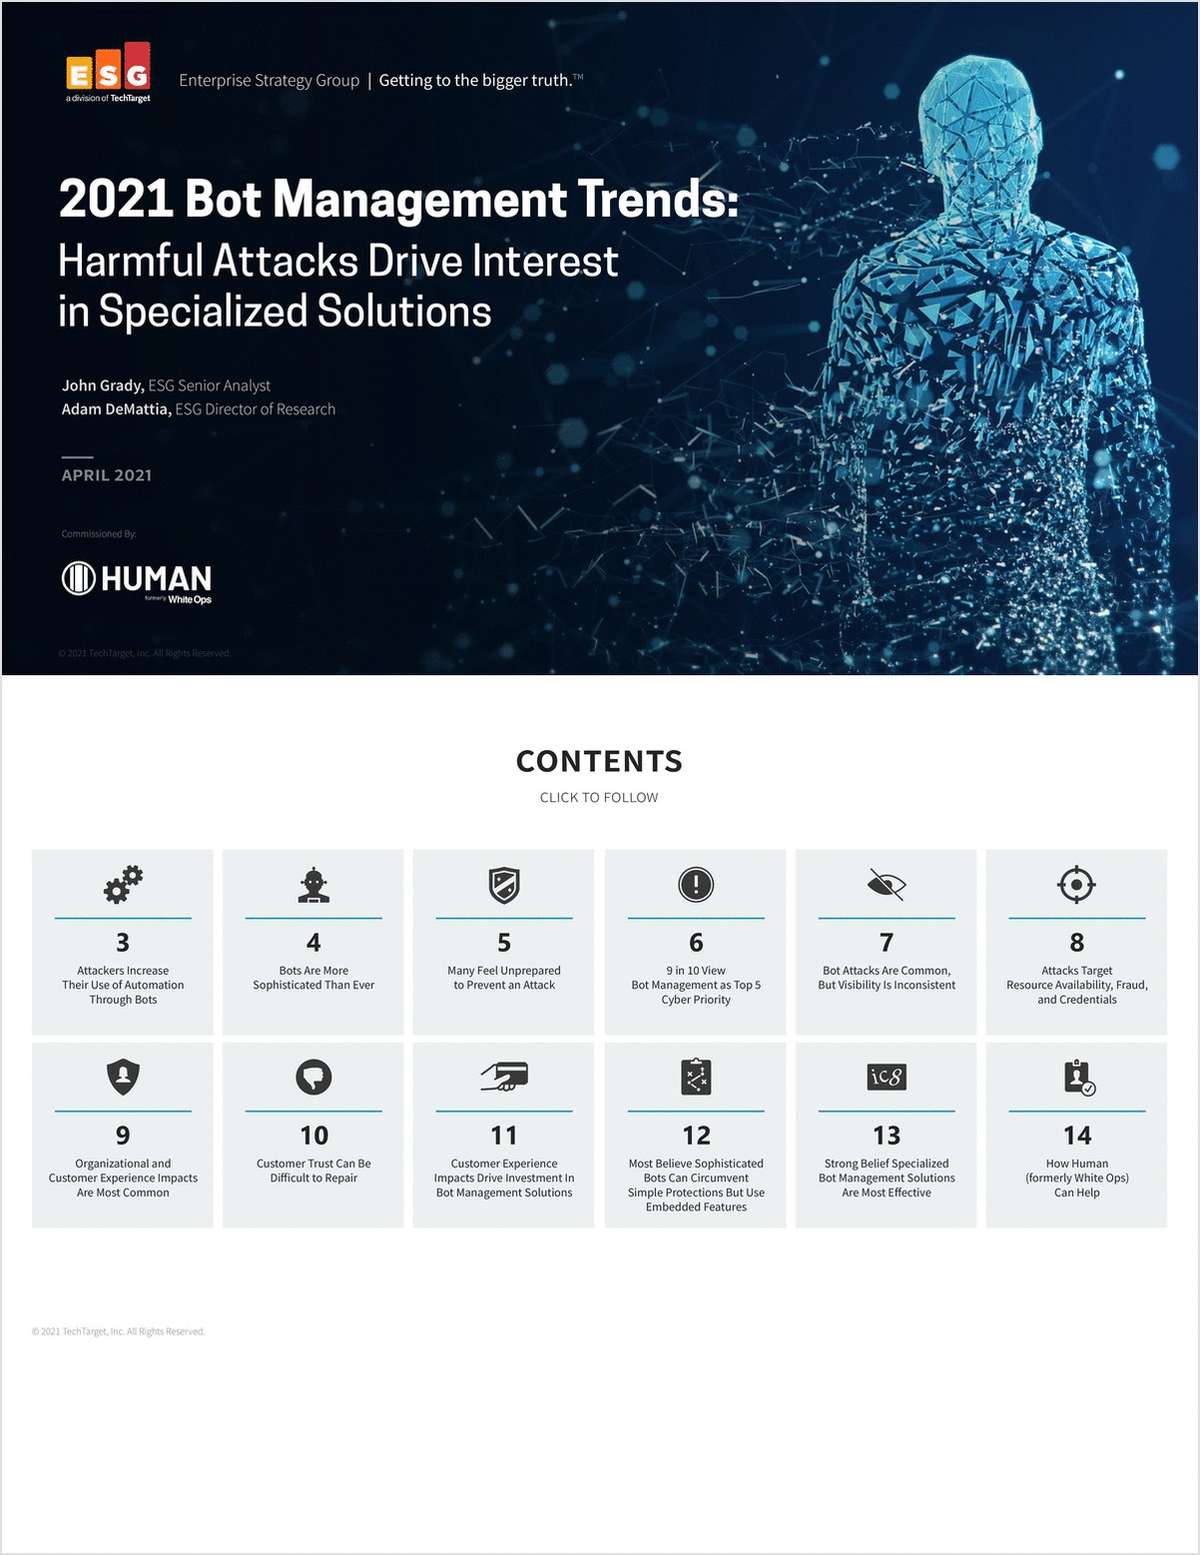 2021 Bot Management Trends: Harmful Attacks Drive Interest in Specialized Solutions